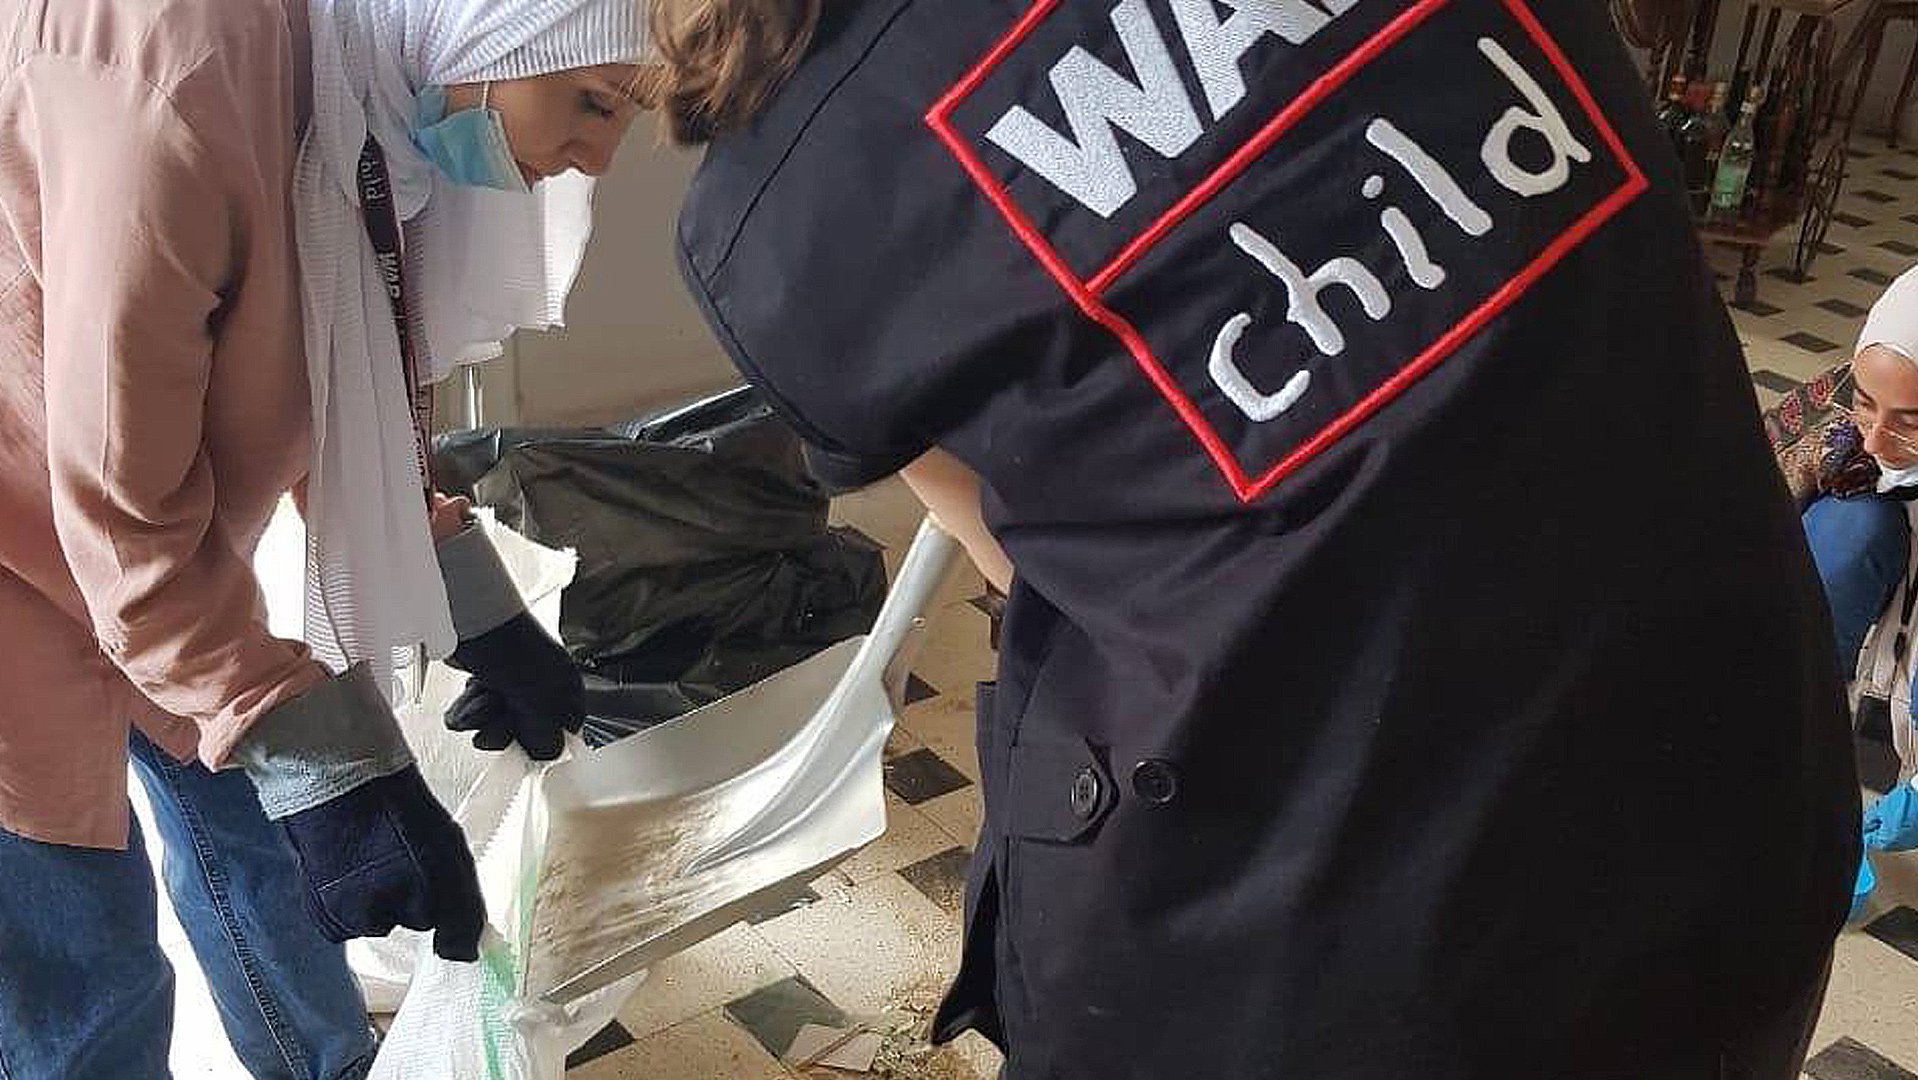 War Child volunteers to clean out houses in Lebanon Beirut after explosions